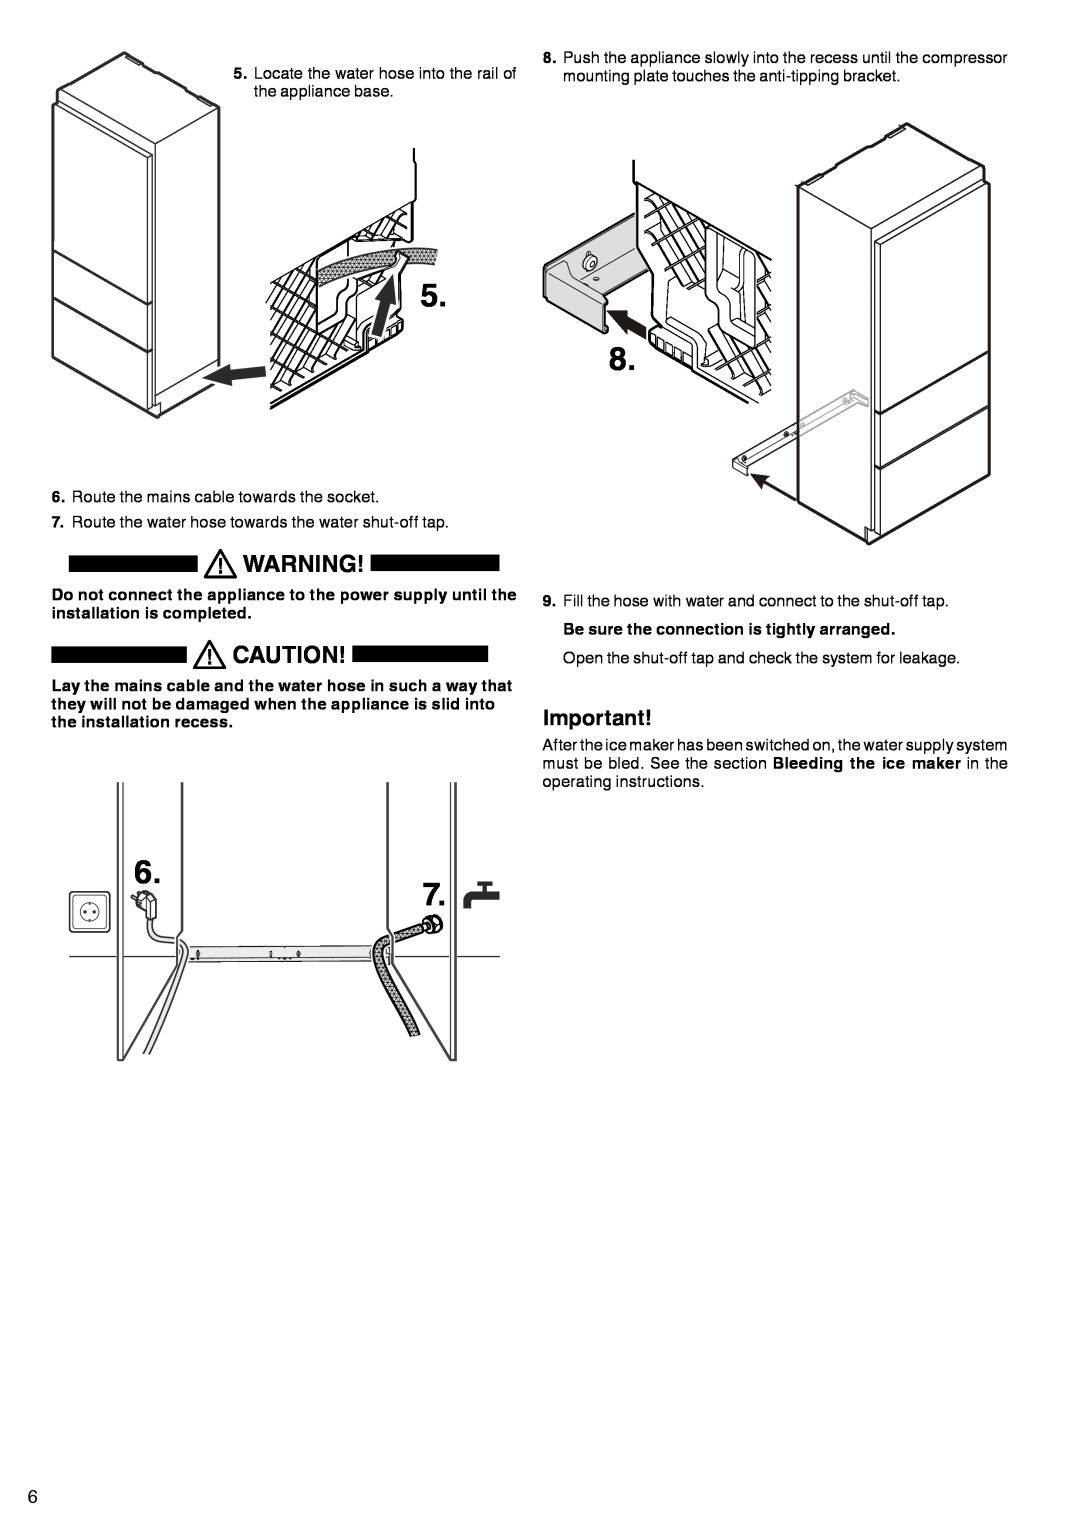 Liebherr ECBN 5066 manual Be sure the connection is tightly arranged 